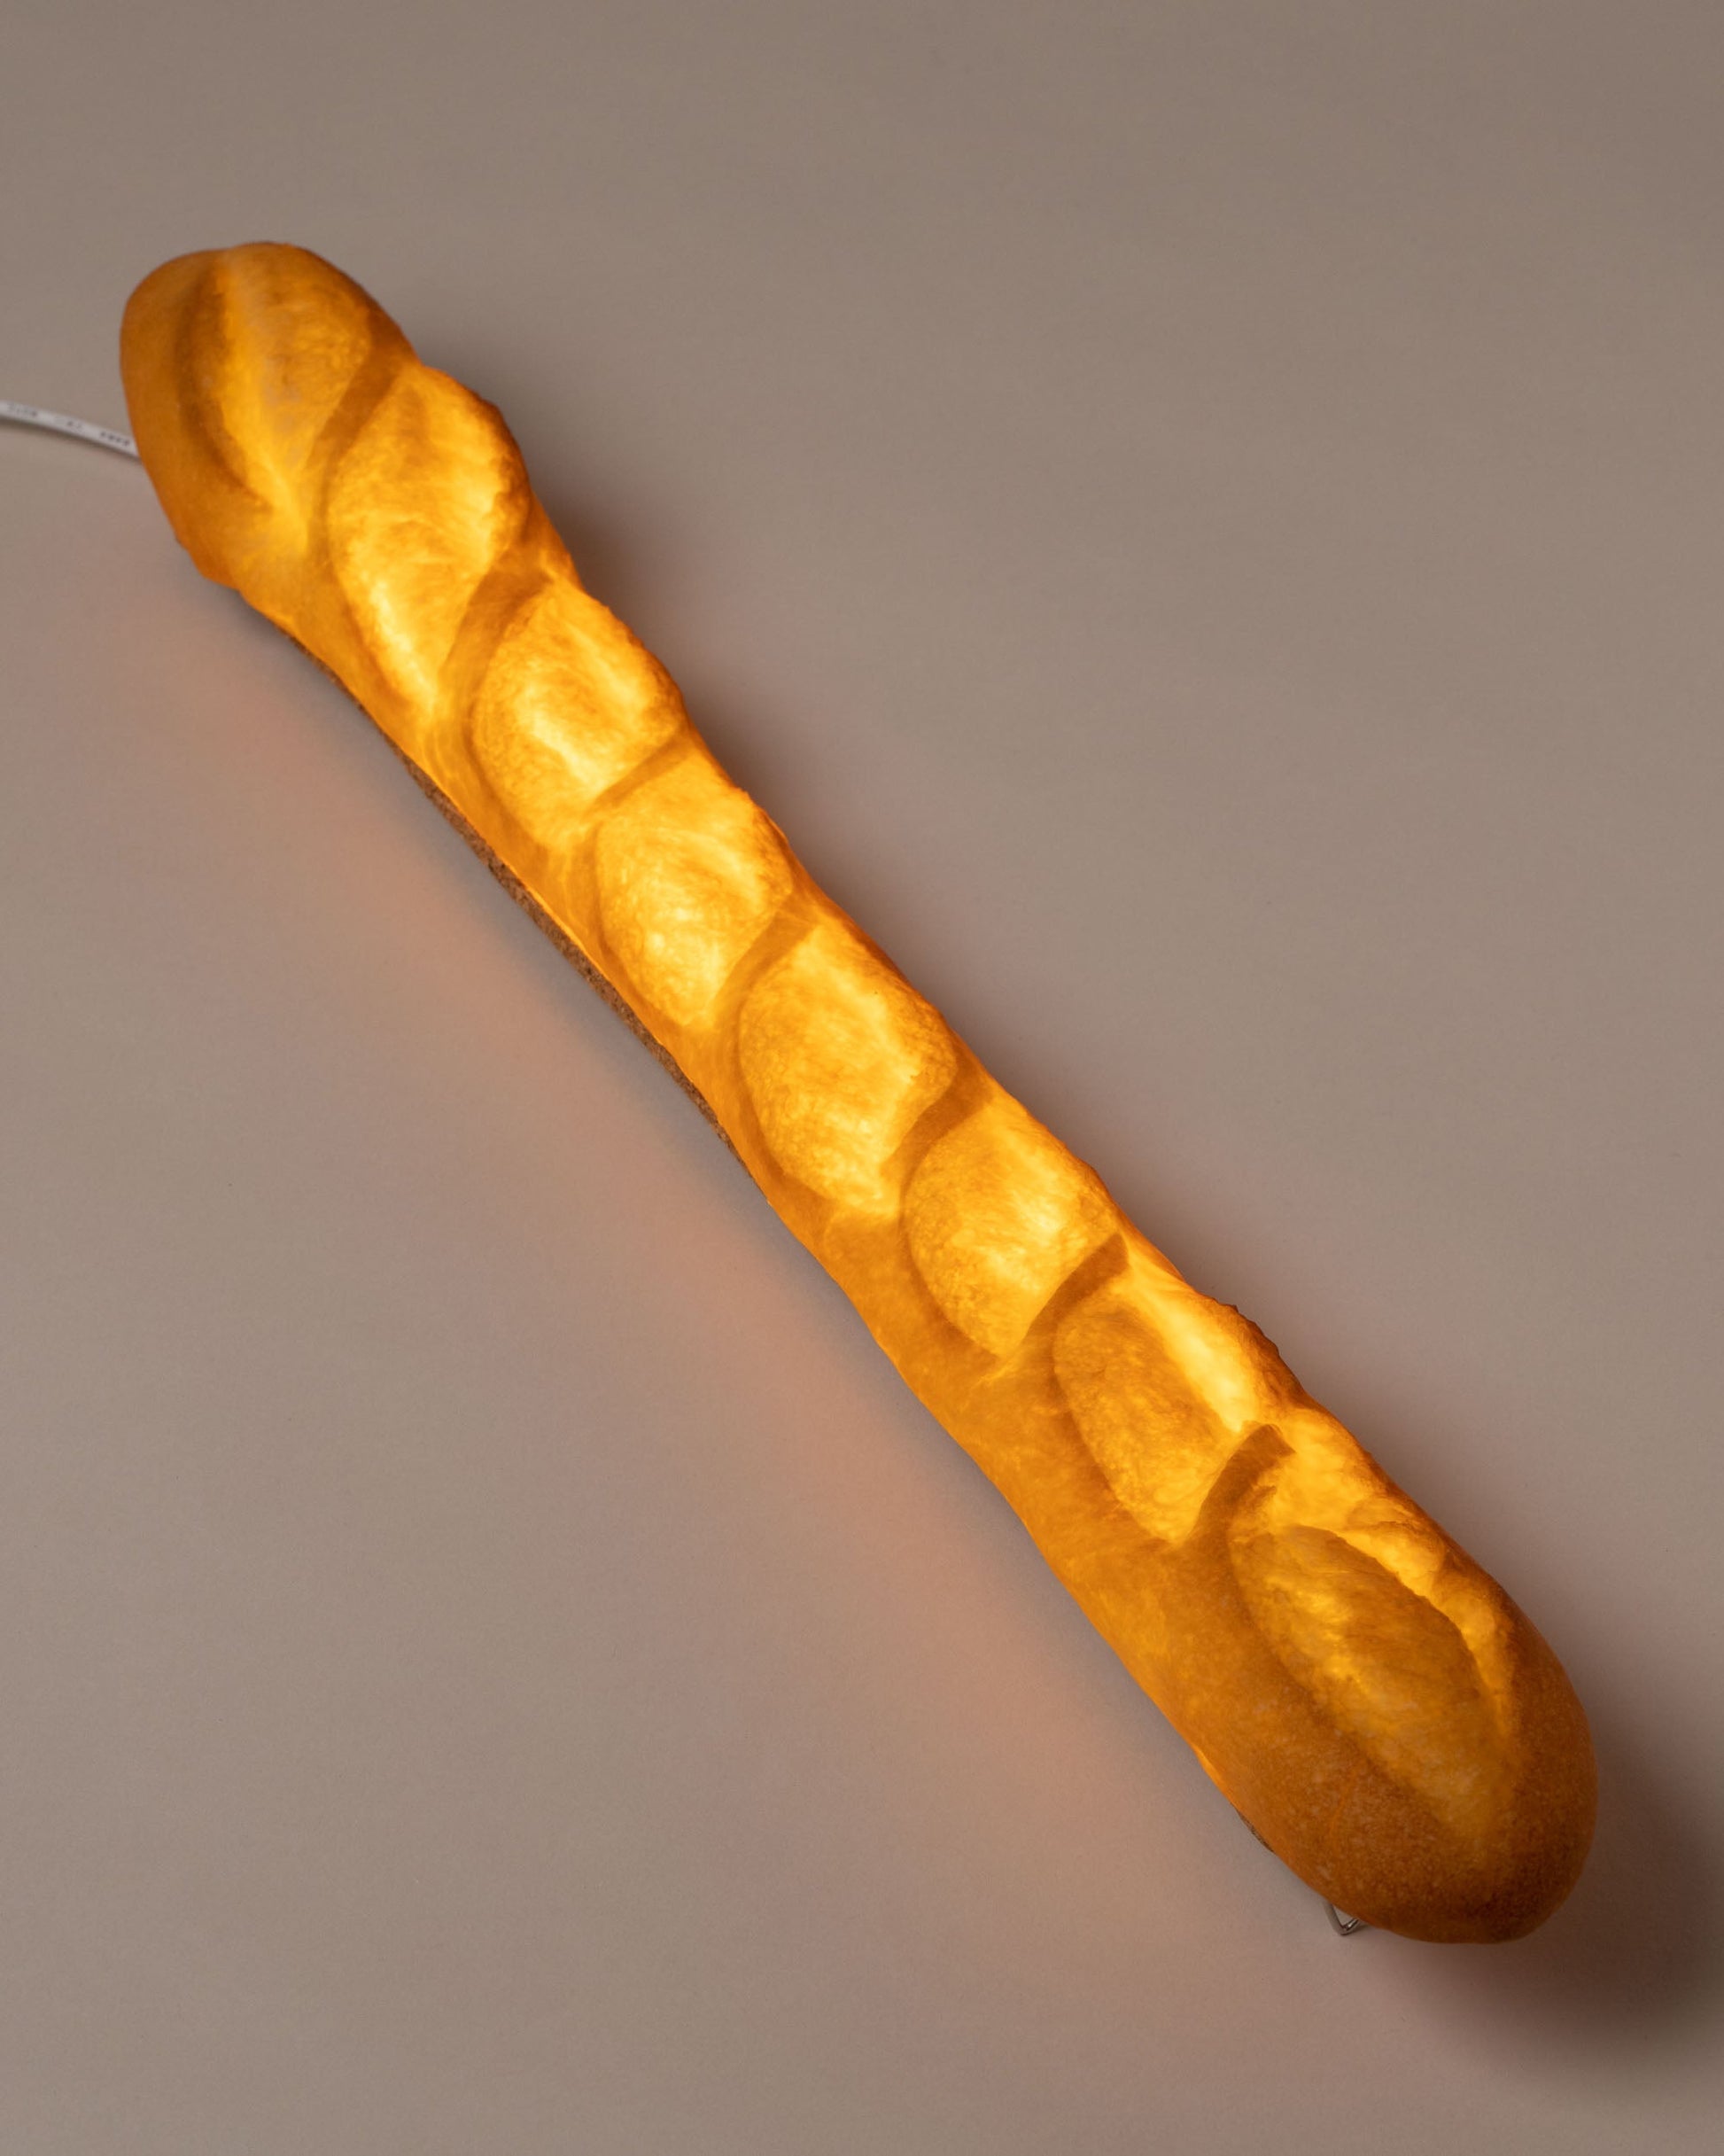  Pampshade Baguette Lamp on light color background.